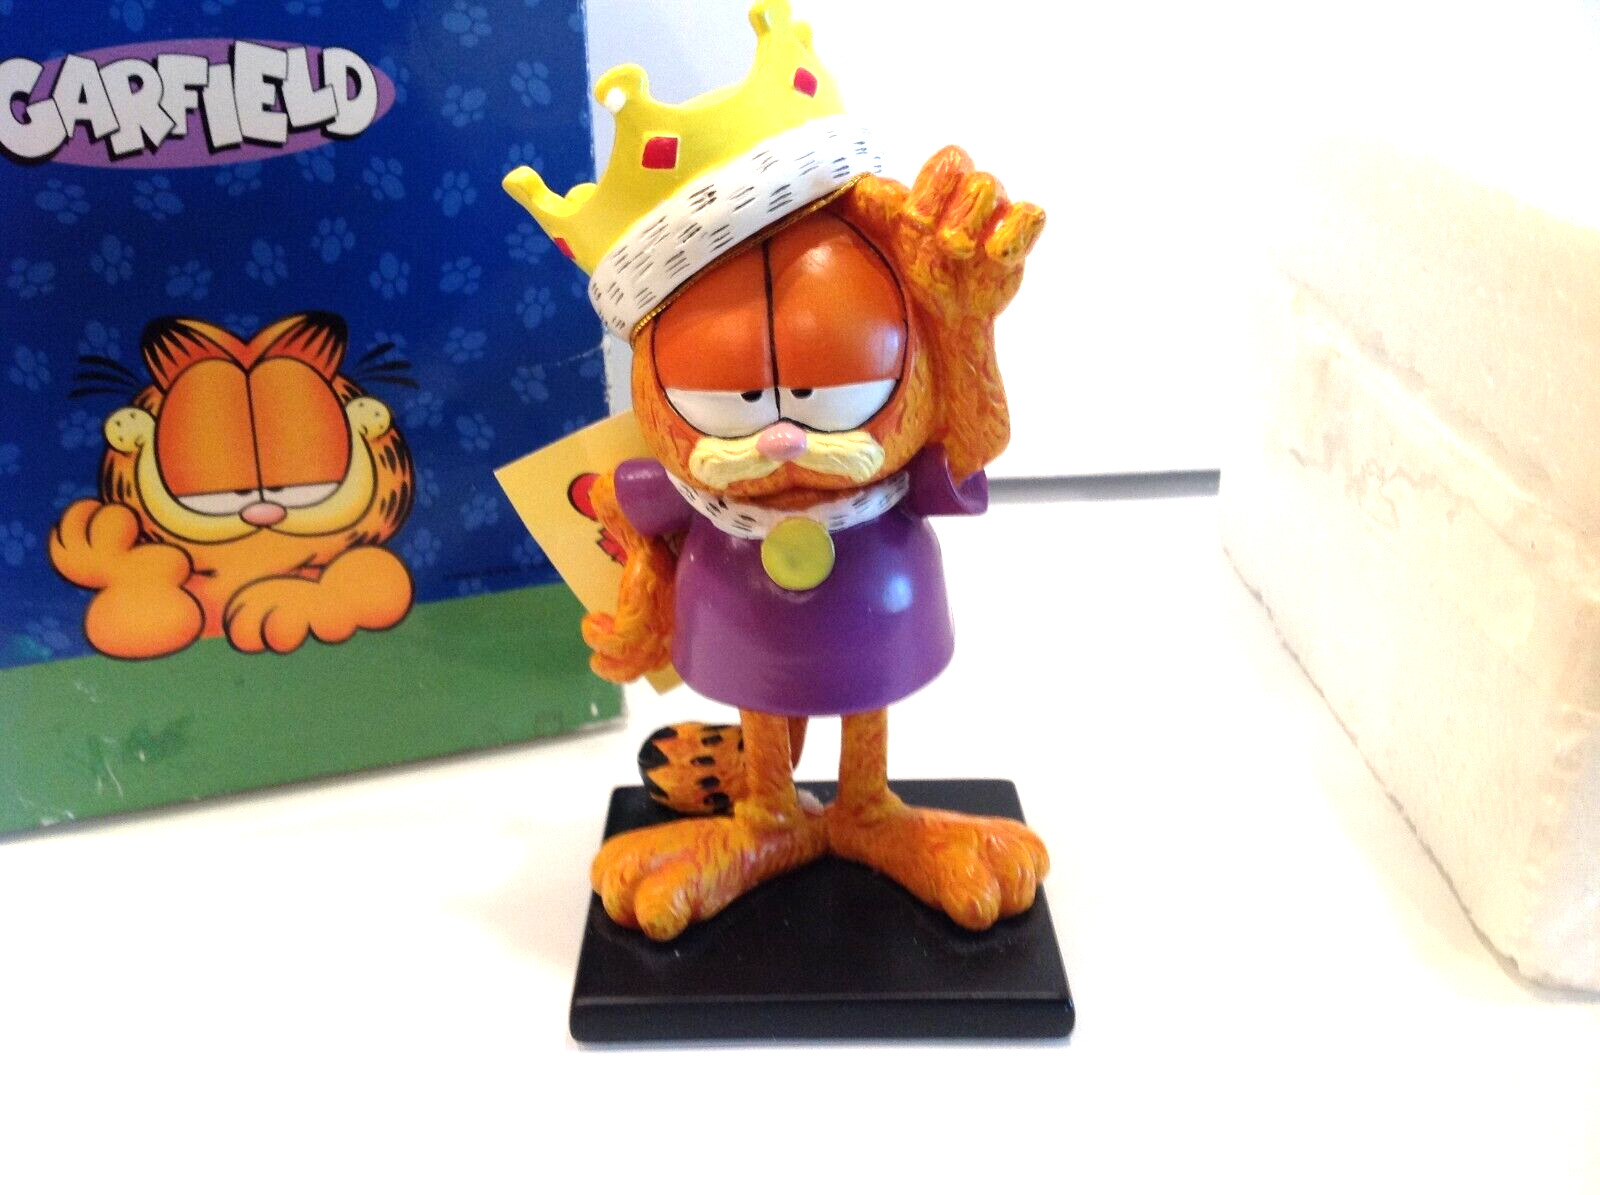 GARFIELD THE CAT APPROACH THE KING by WESTLAND NUMBER 15282 RARE NIB